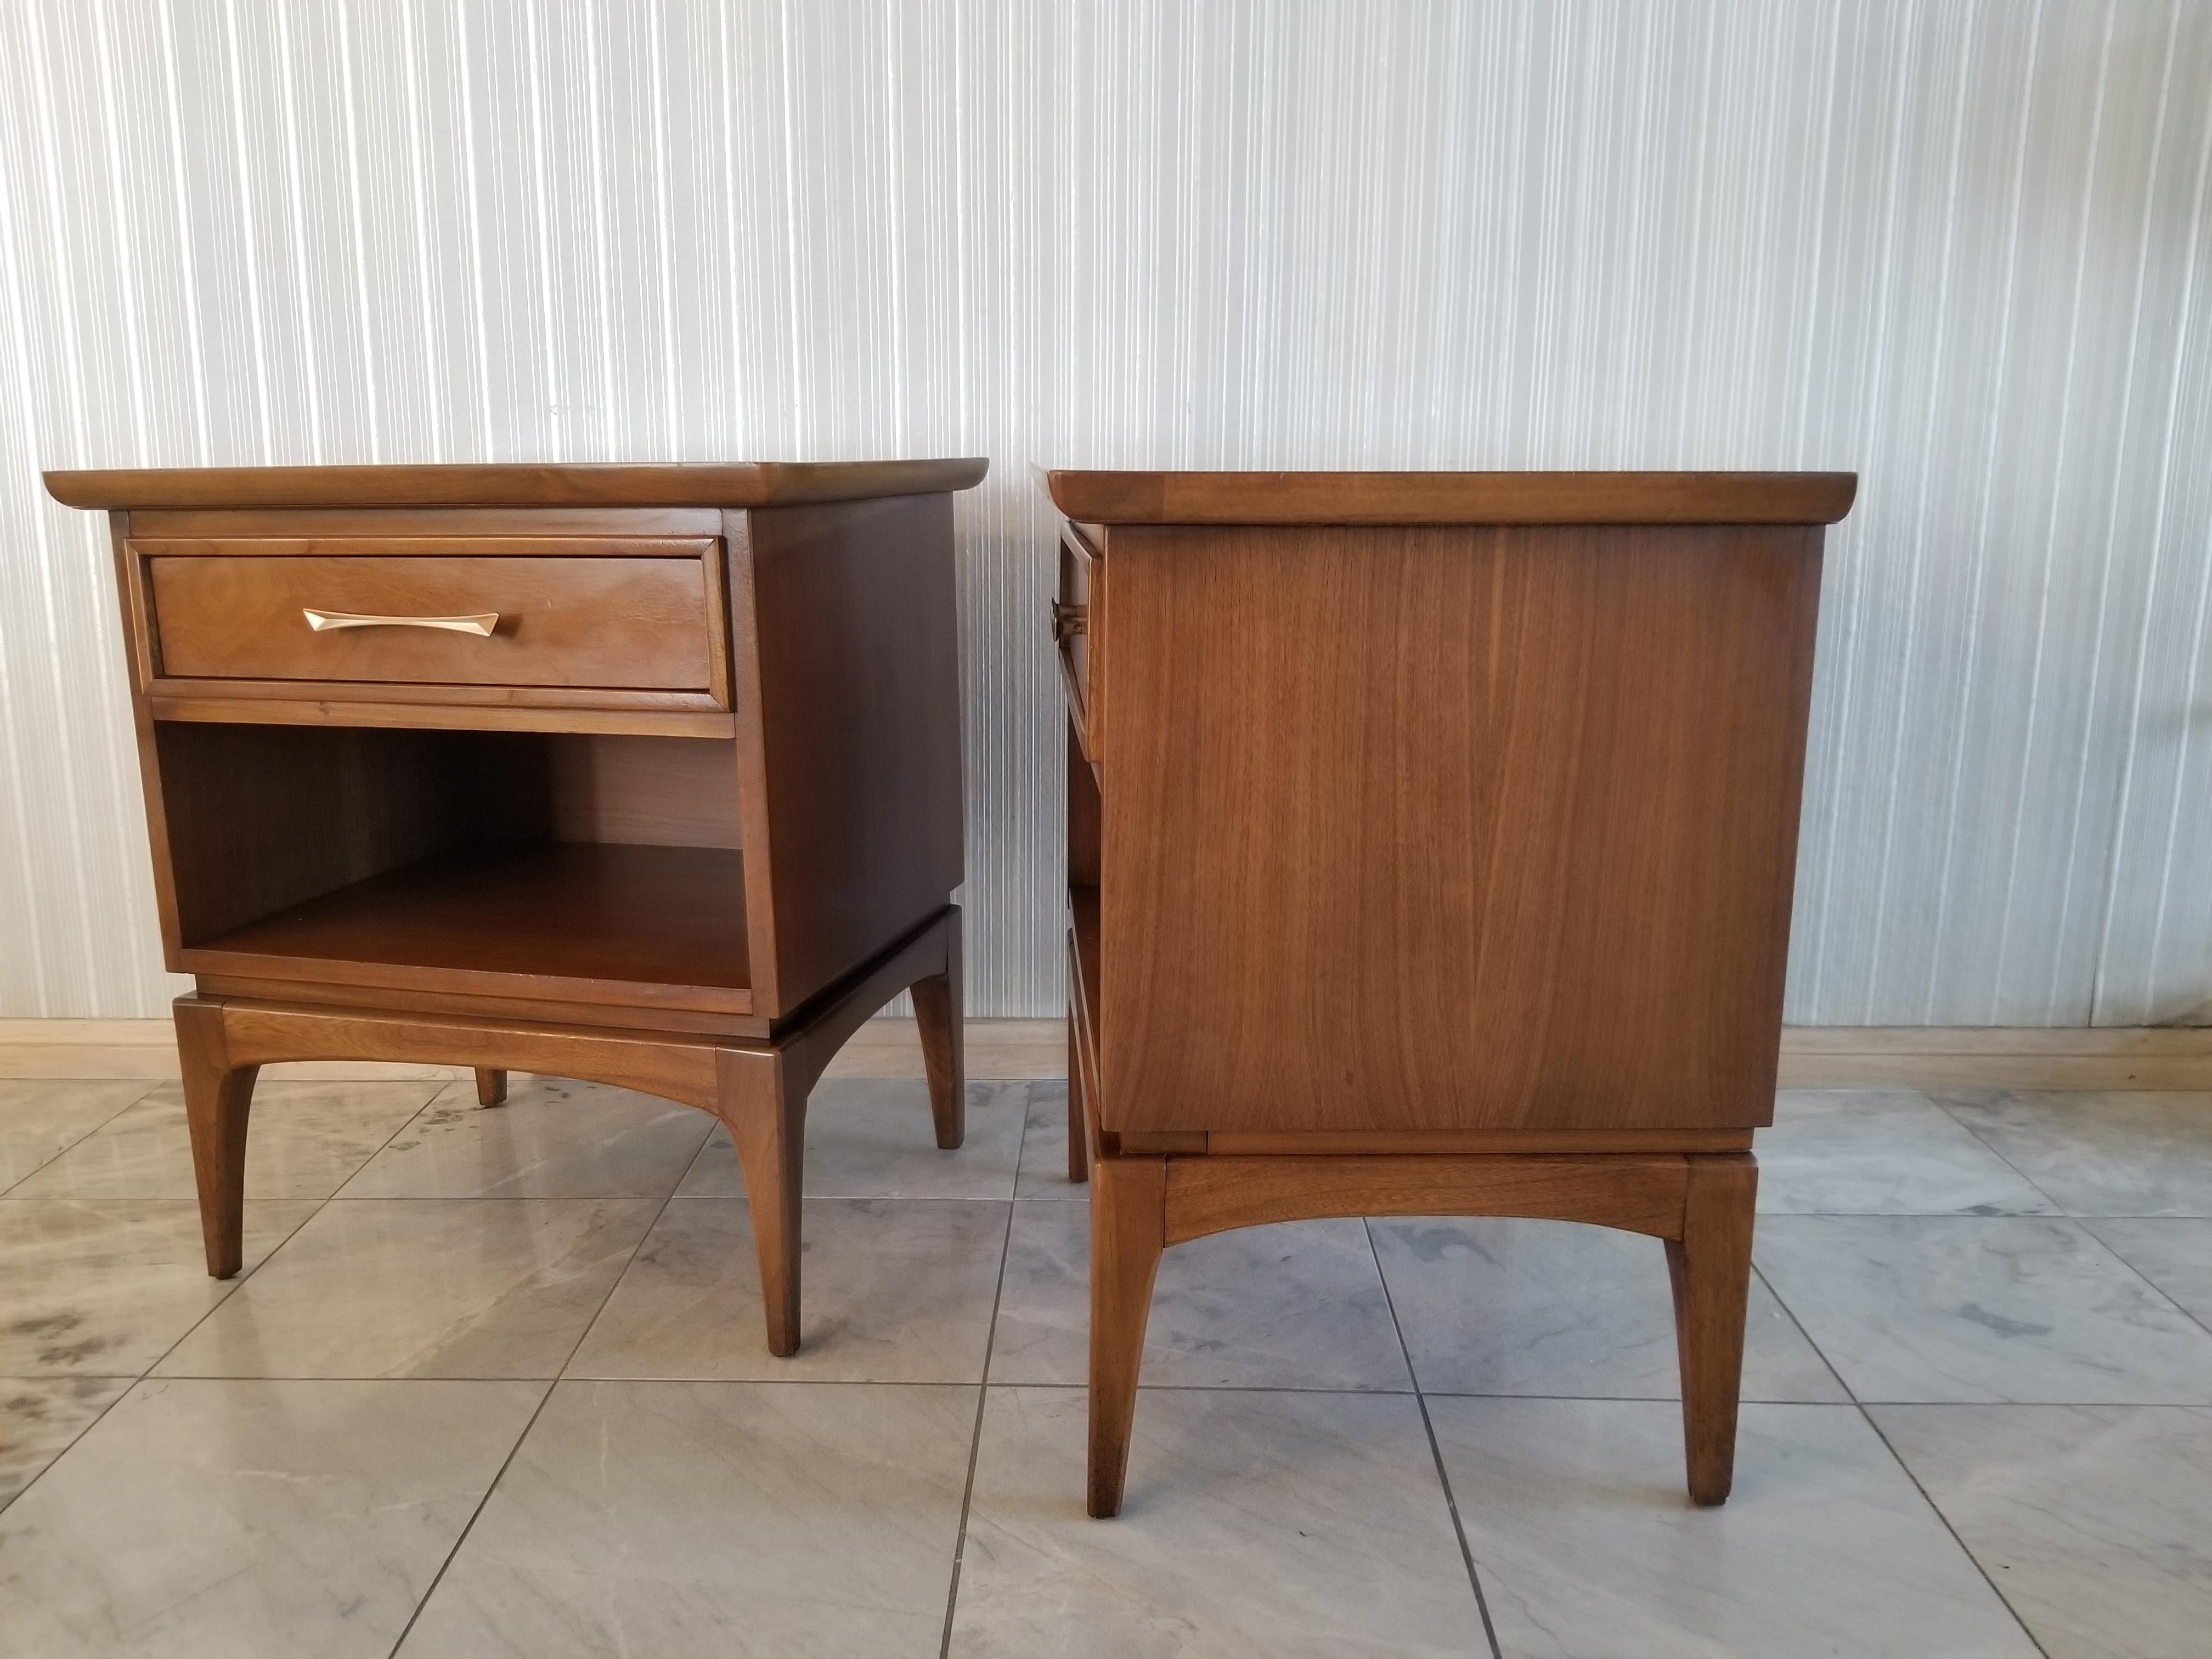 Kent Coffey Furniture Lenoir North Carolina midcentury vintage modern finest 1960s USA
Pair of walnut nightstands end side tables from The Wharton Line features original drawer pull handles.
Nightstands are designed with a dovetail joint spacious